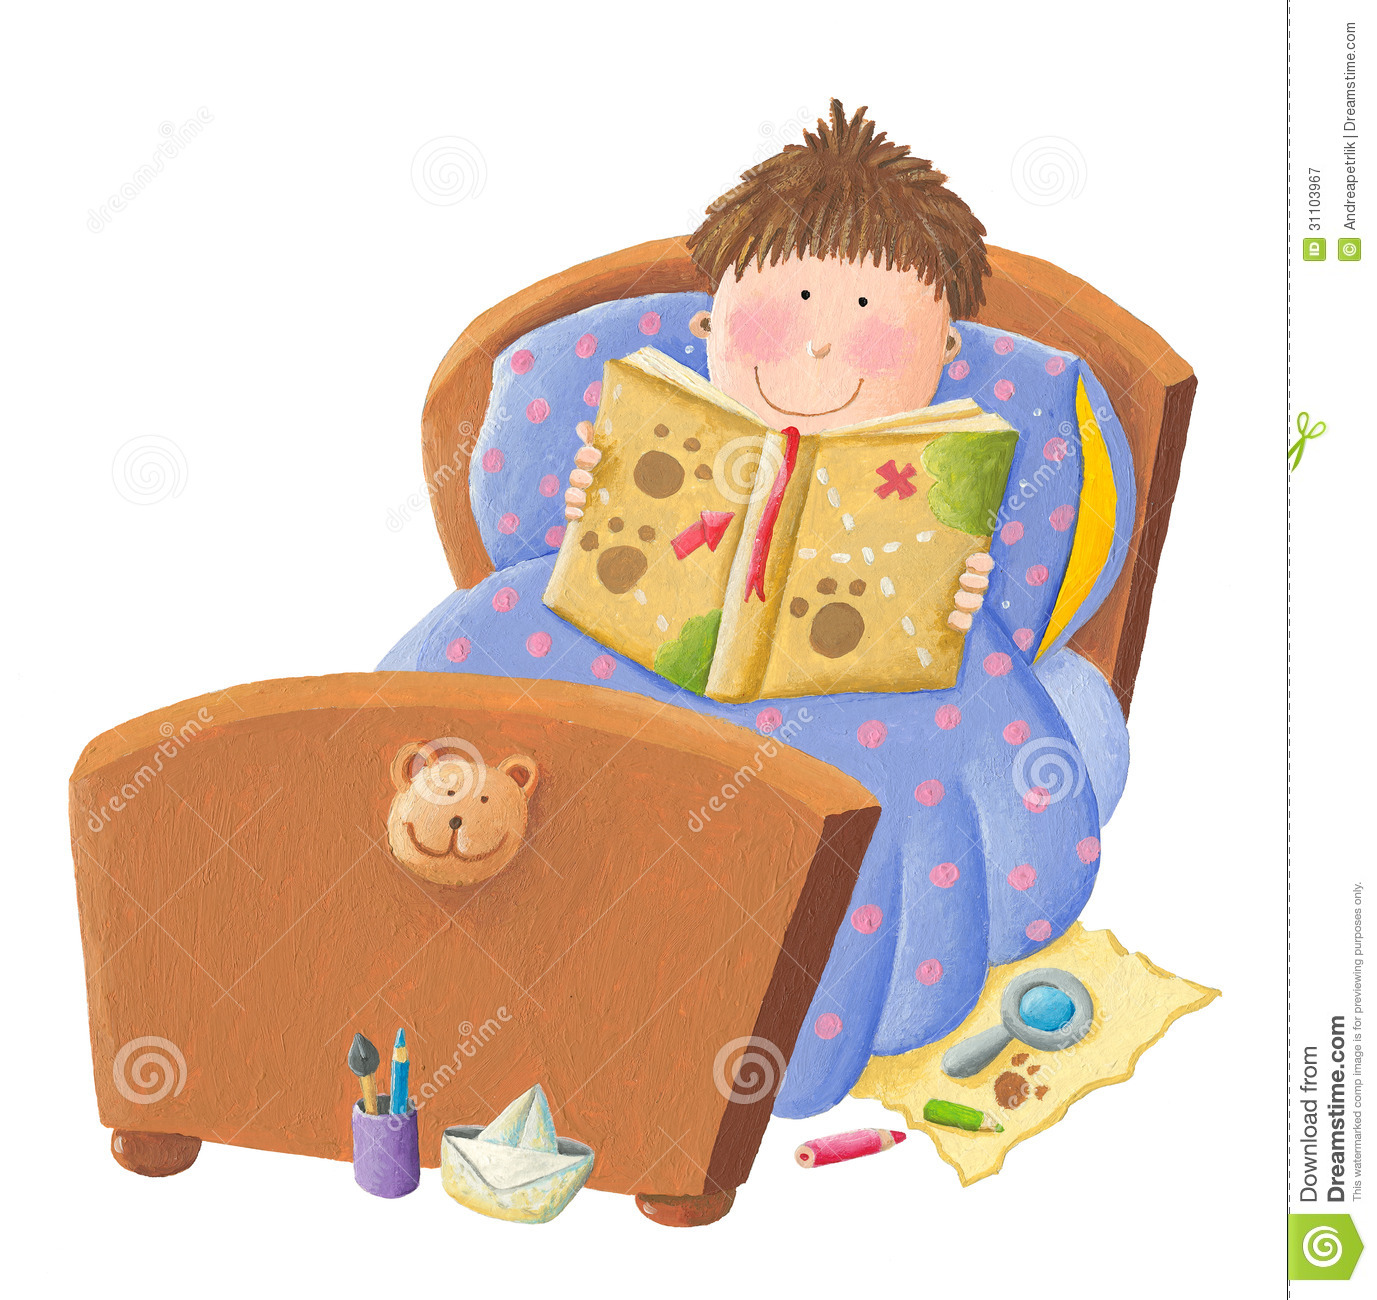 Boy Reading Bed Time Story Royalty Free Stock Photography   Image